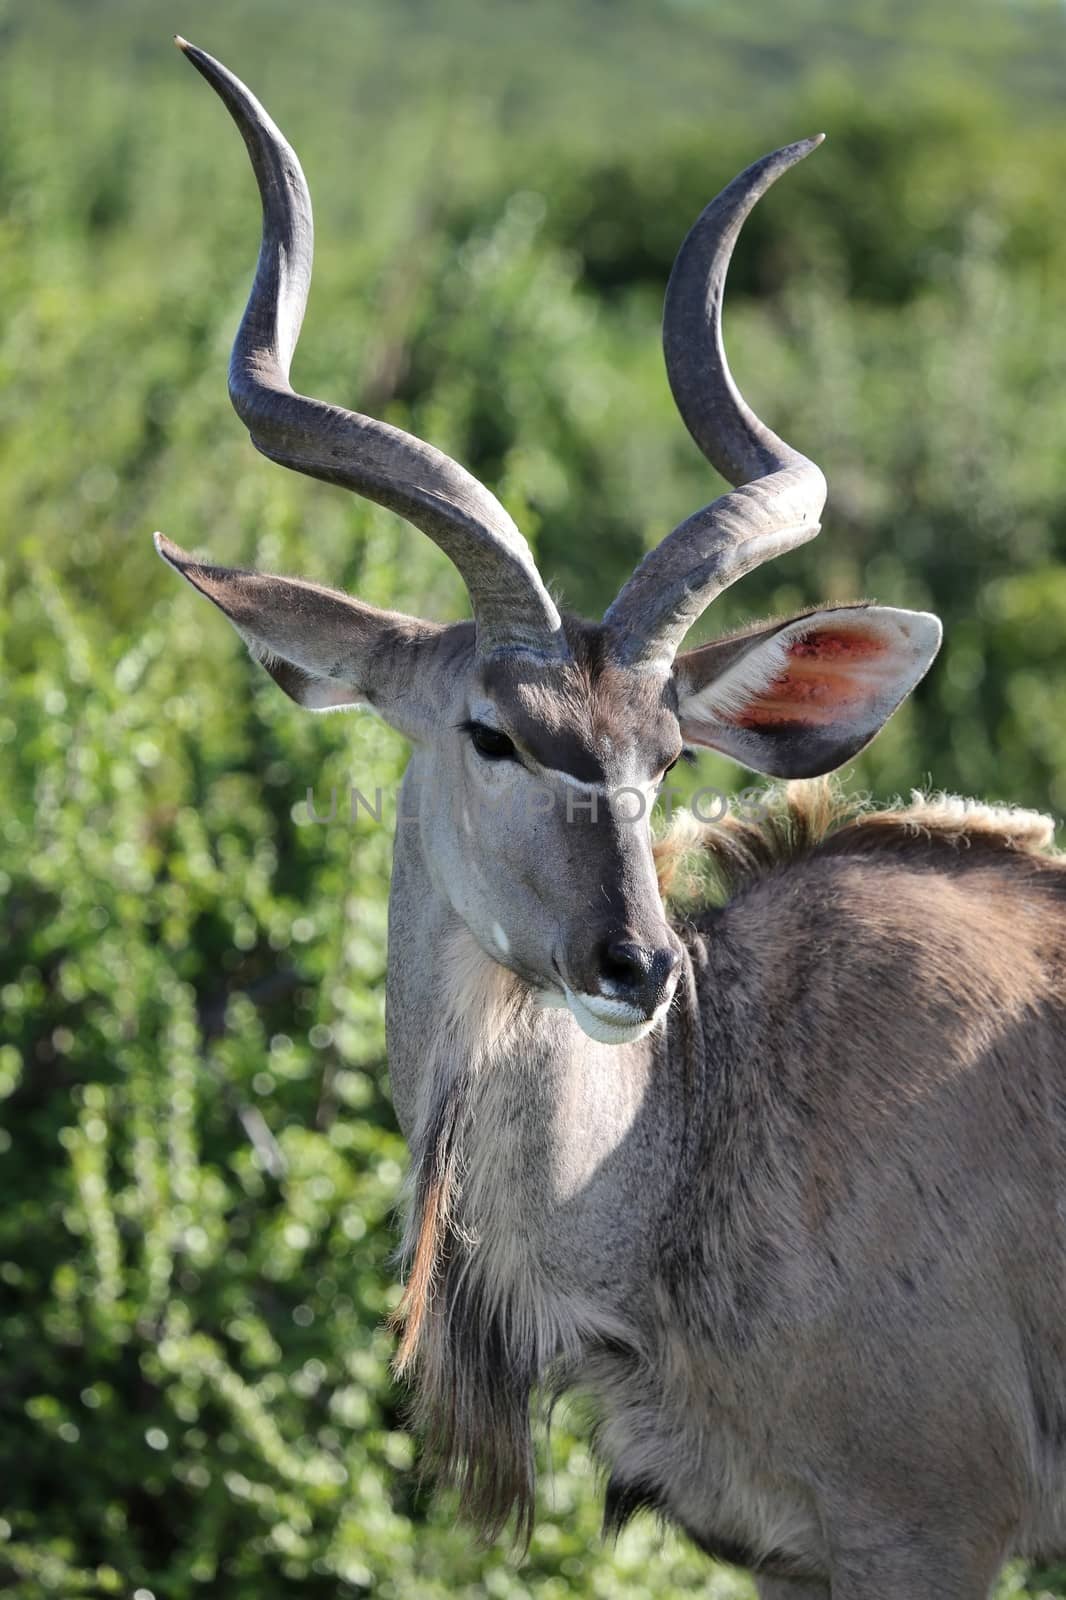 Kudu antelope with a coy look and long horns